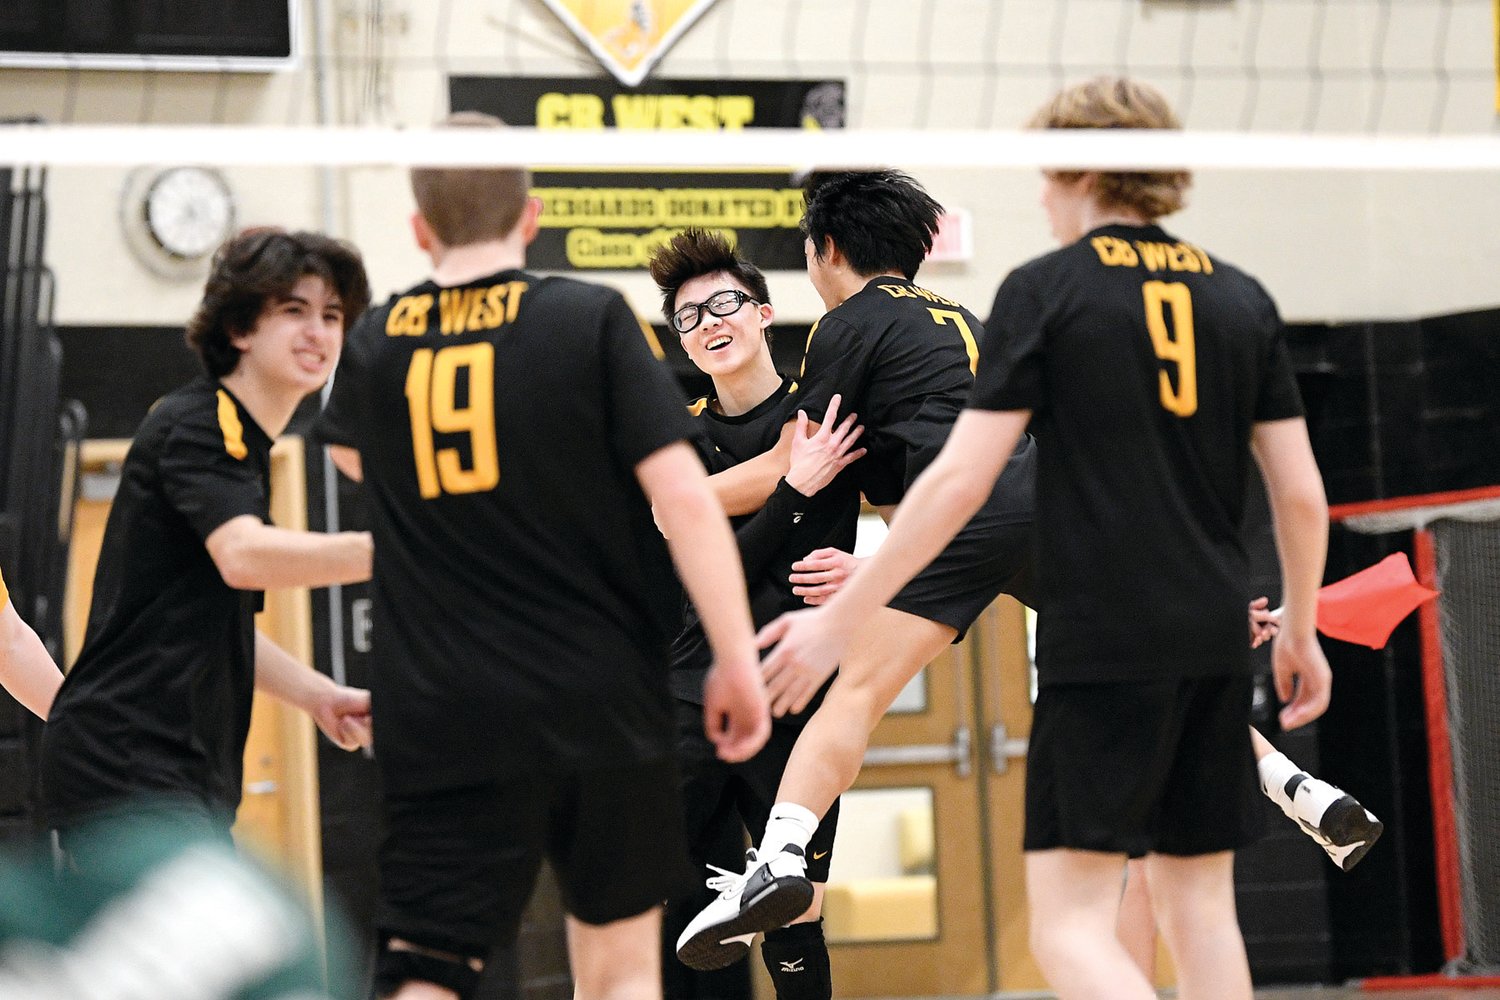 CB West’s Oliver Hu (in glasses) celebrates a point in the first set.